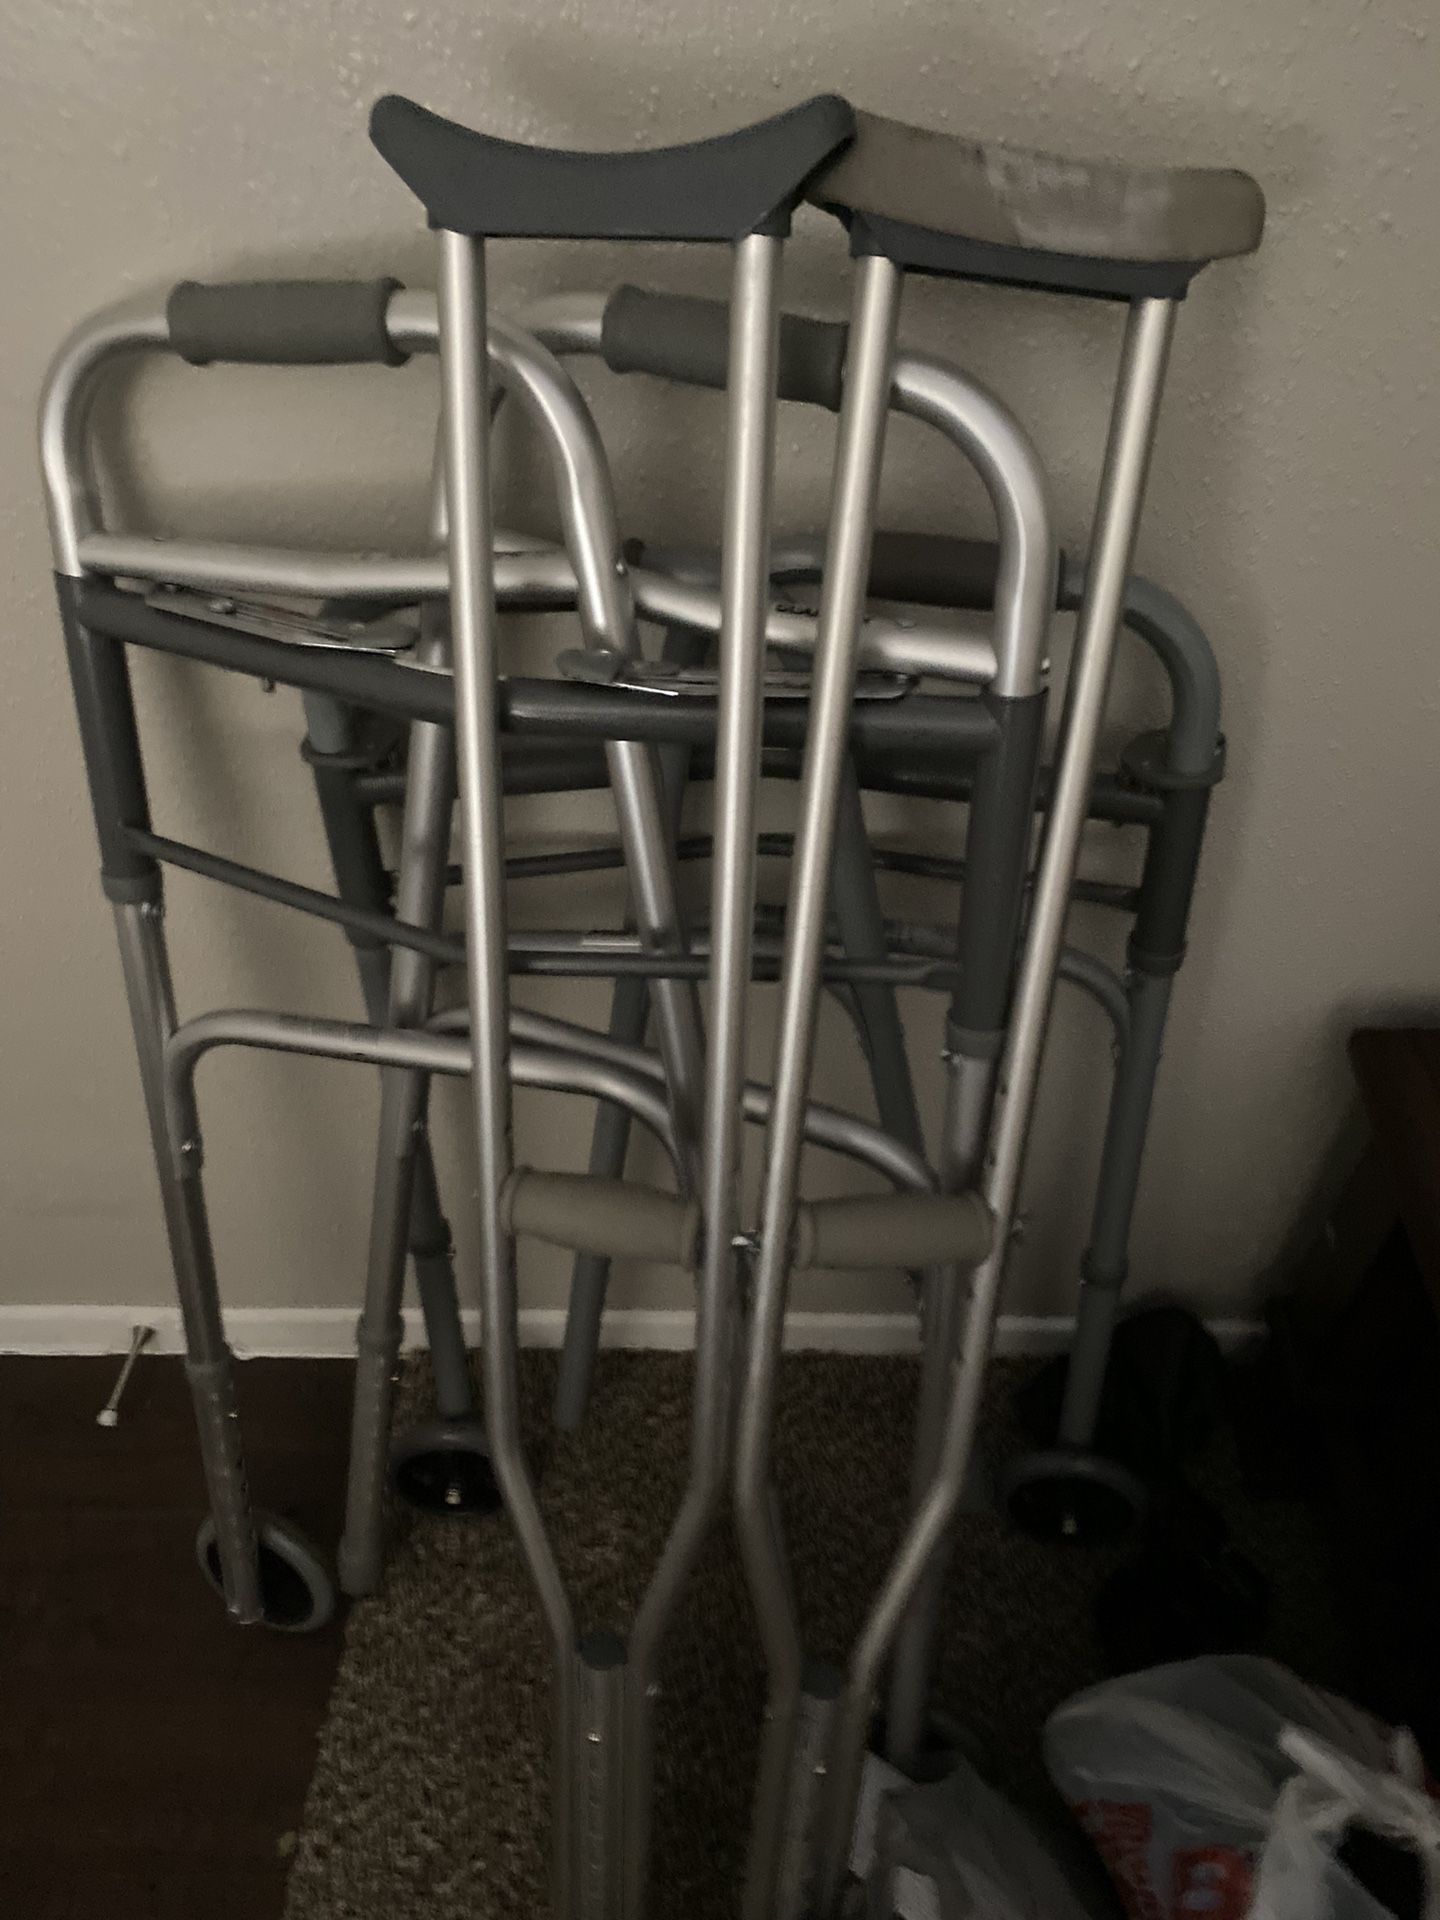 1 Set Of Crutches And 2 Walkers 